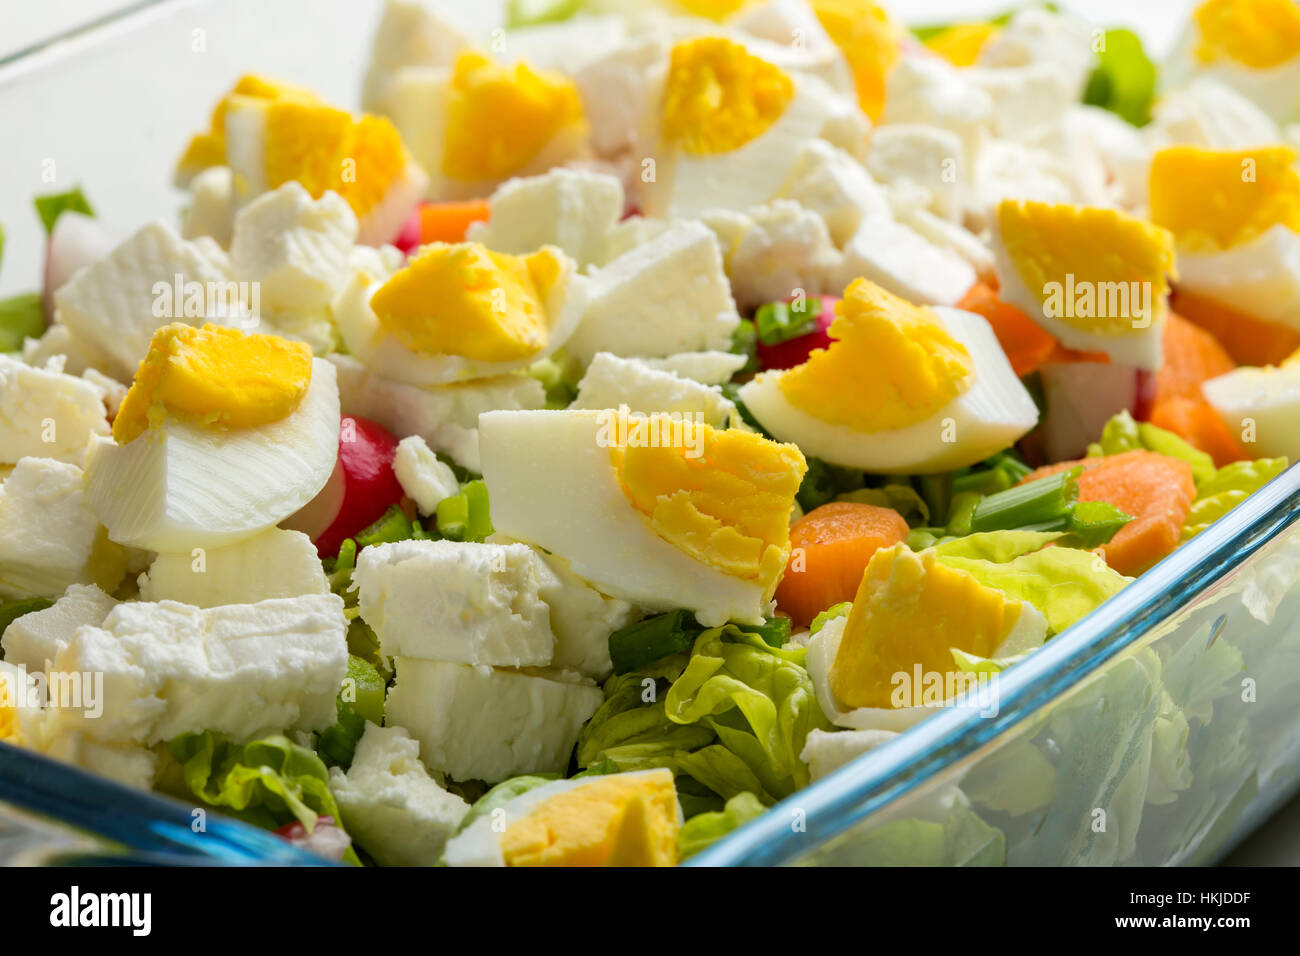 Salad with eggs, feta cheese and carrot in transparent glass bowl Stock Photo